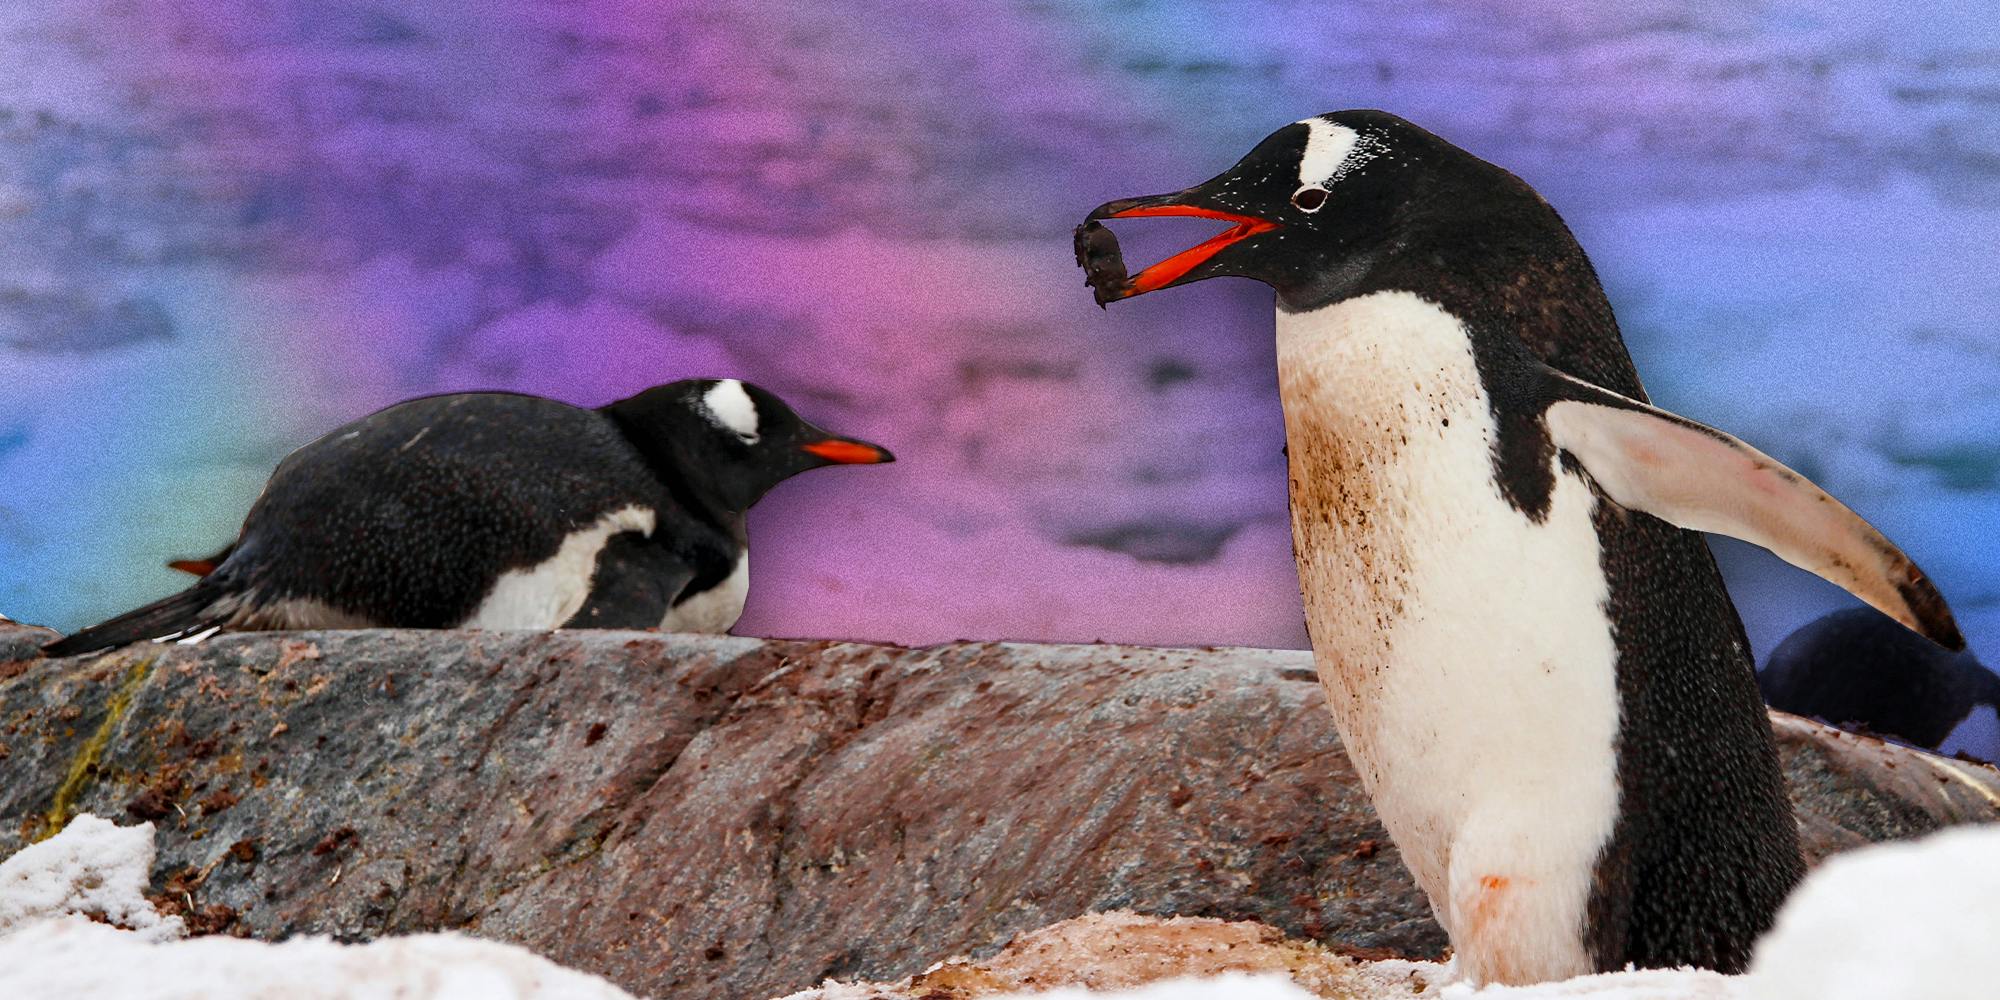 Pebbling: a love language inspired by penguins